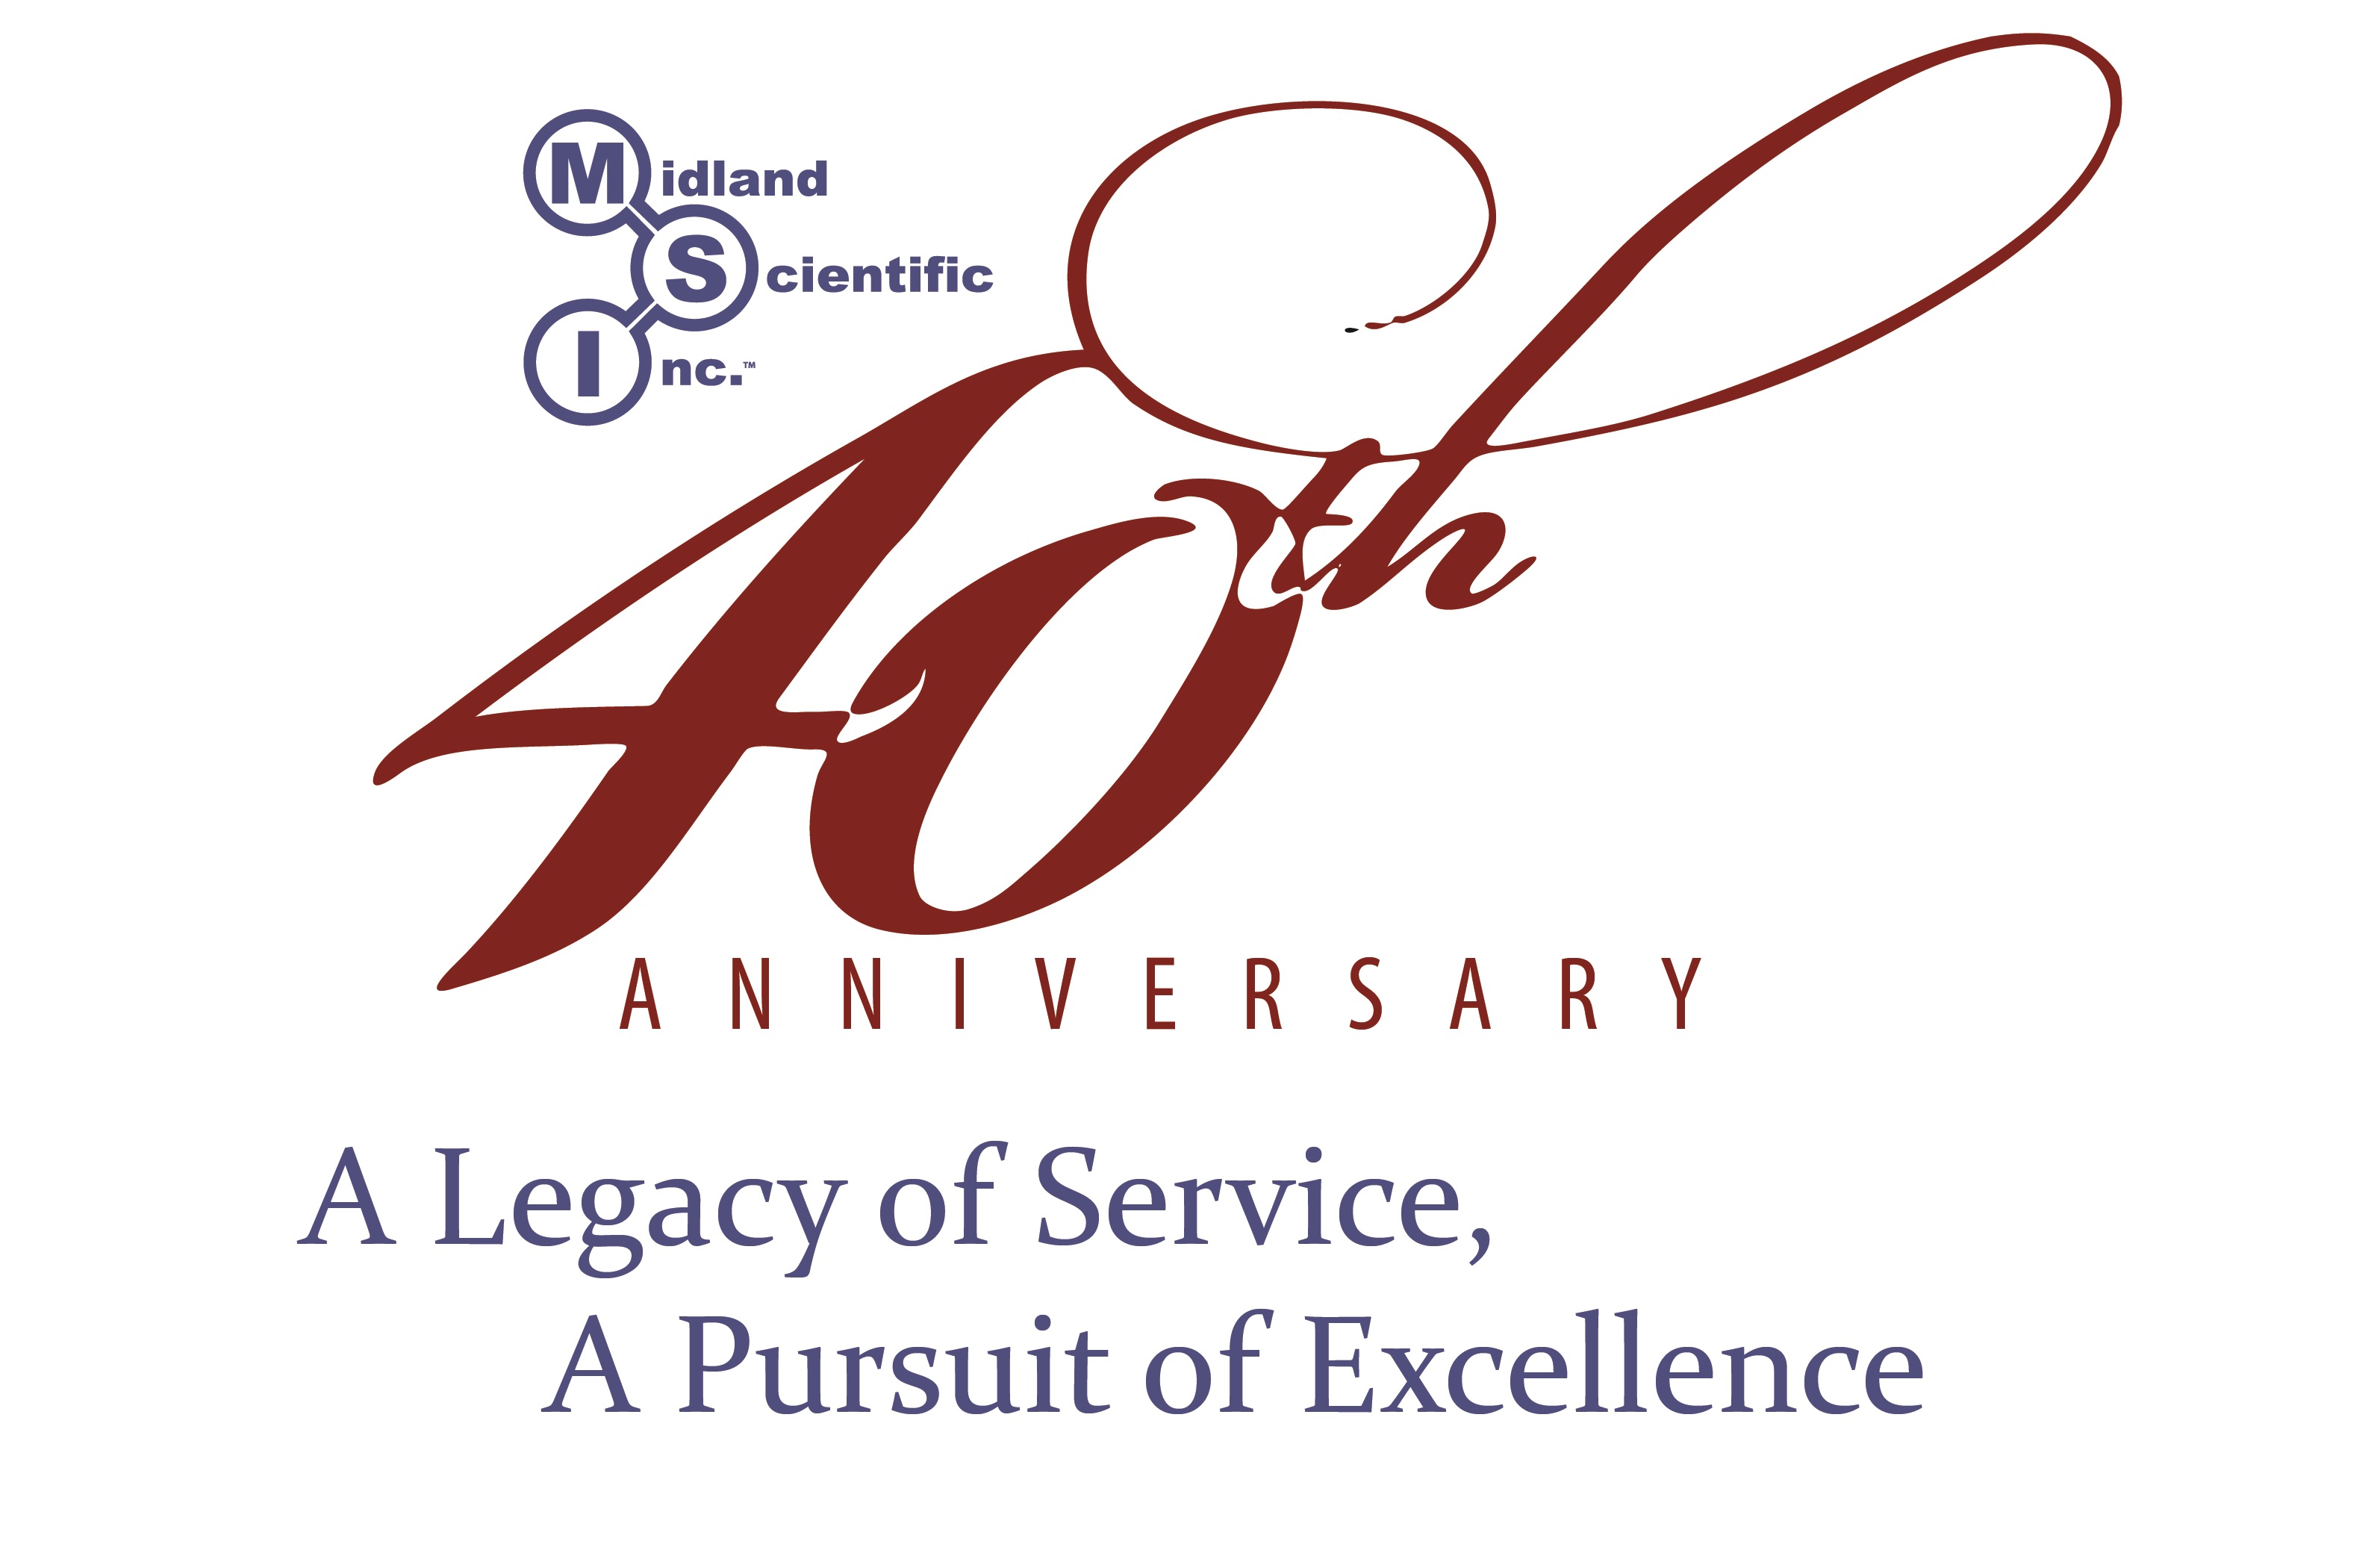 Celebrating 40 years of business